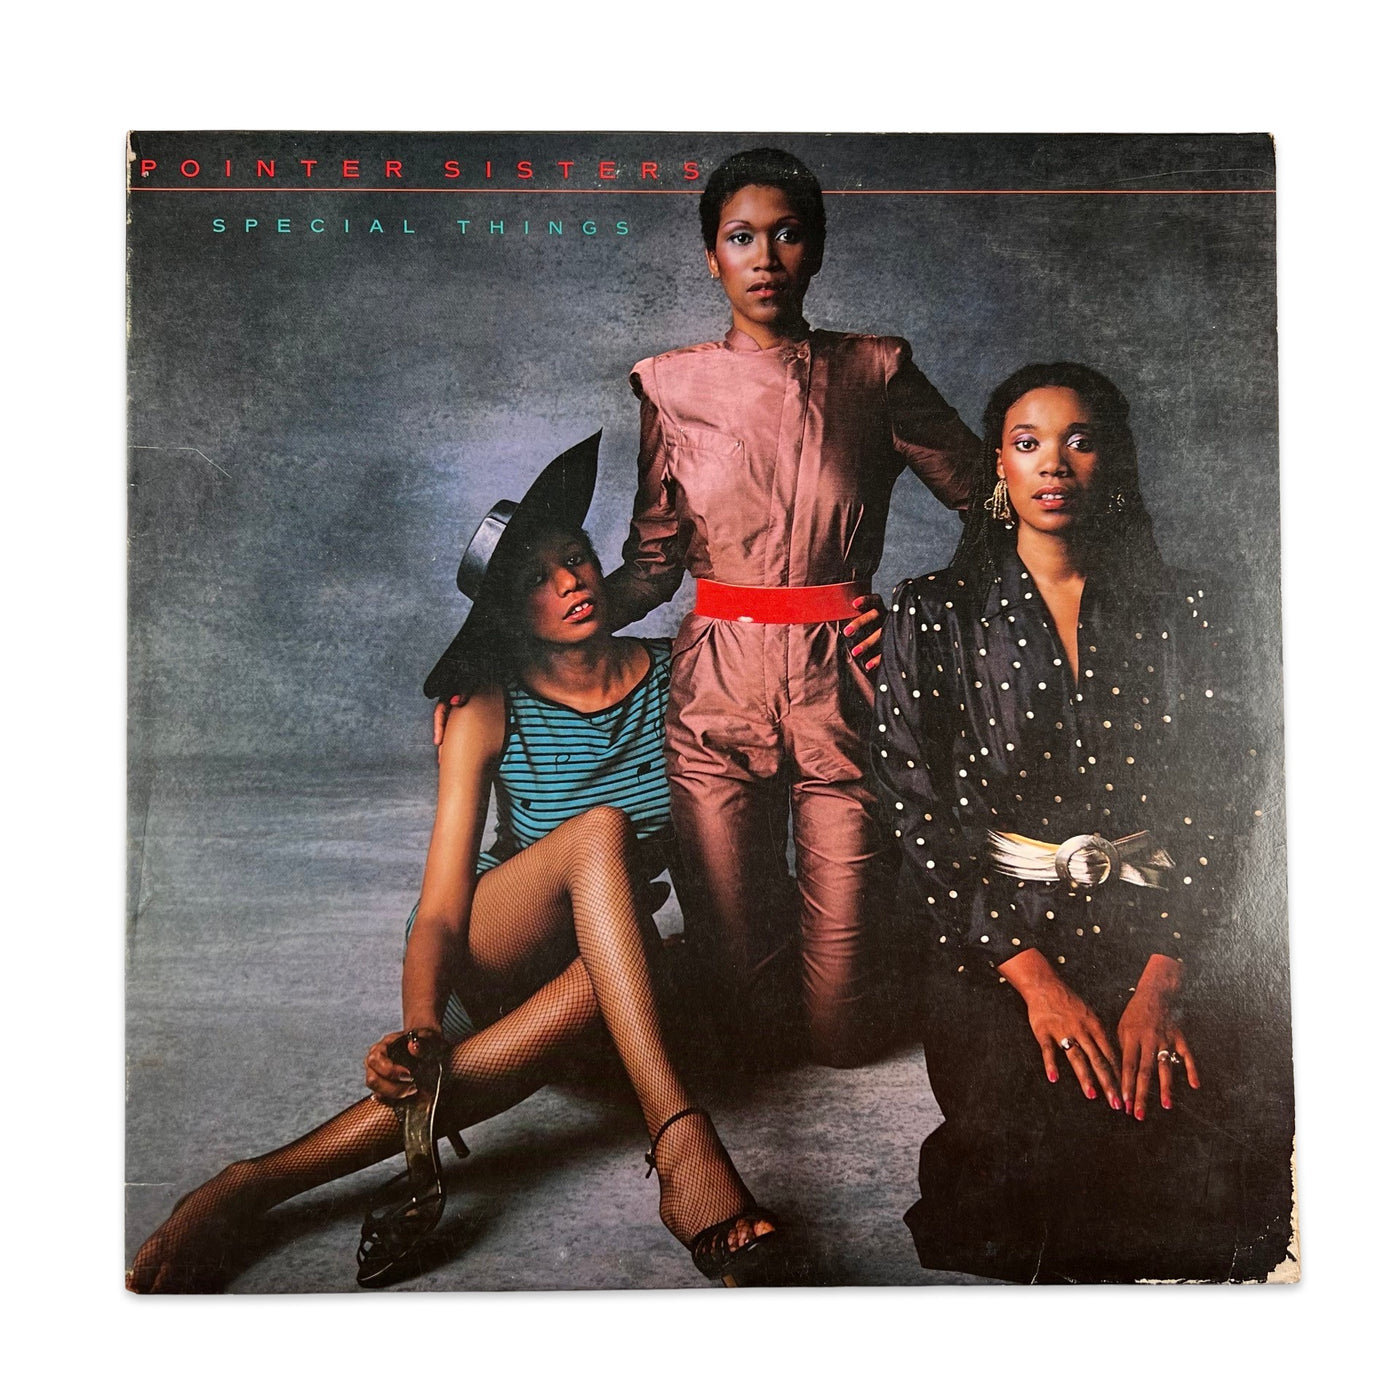 Pointer Sisters – Special Things